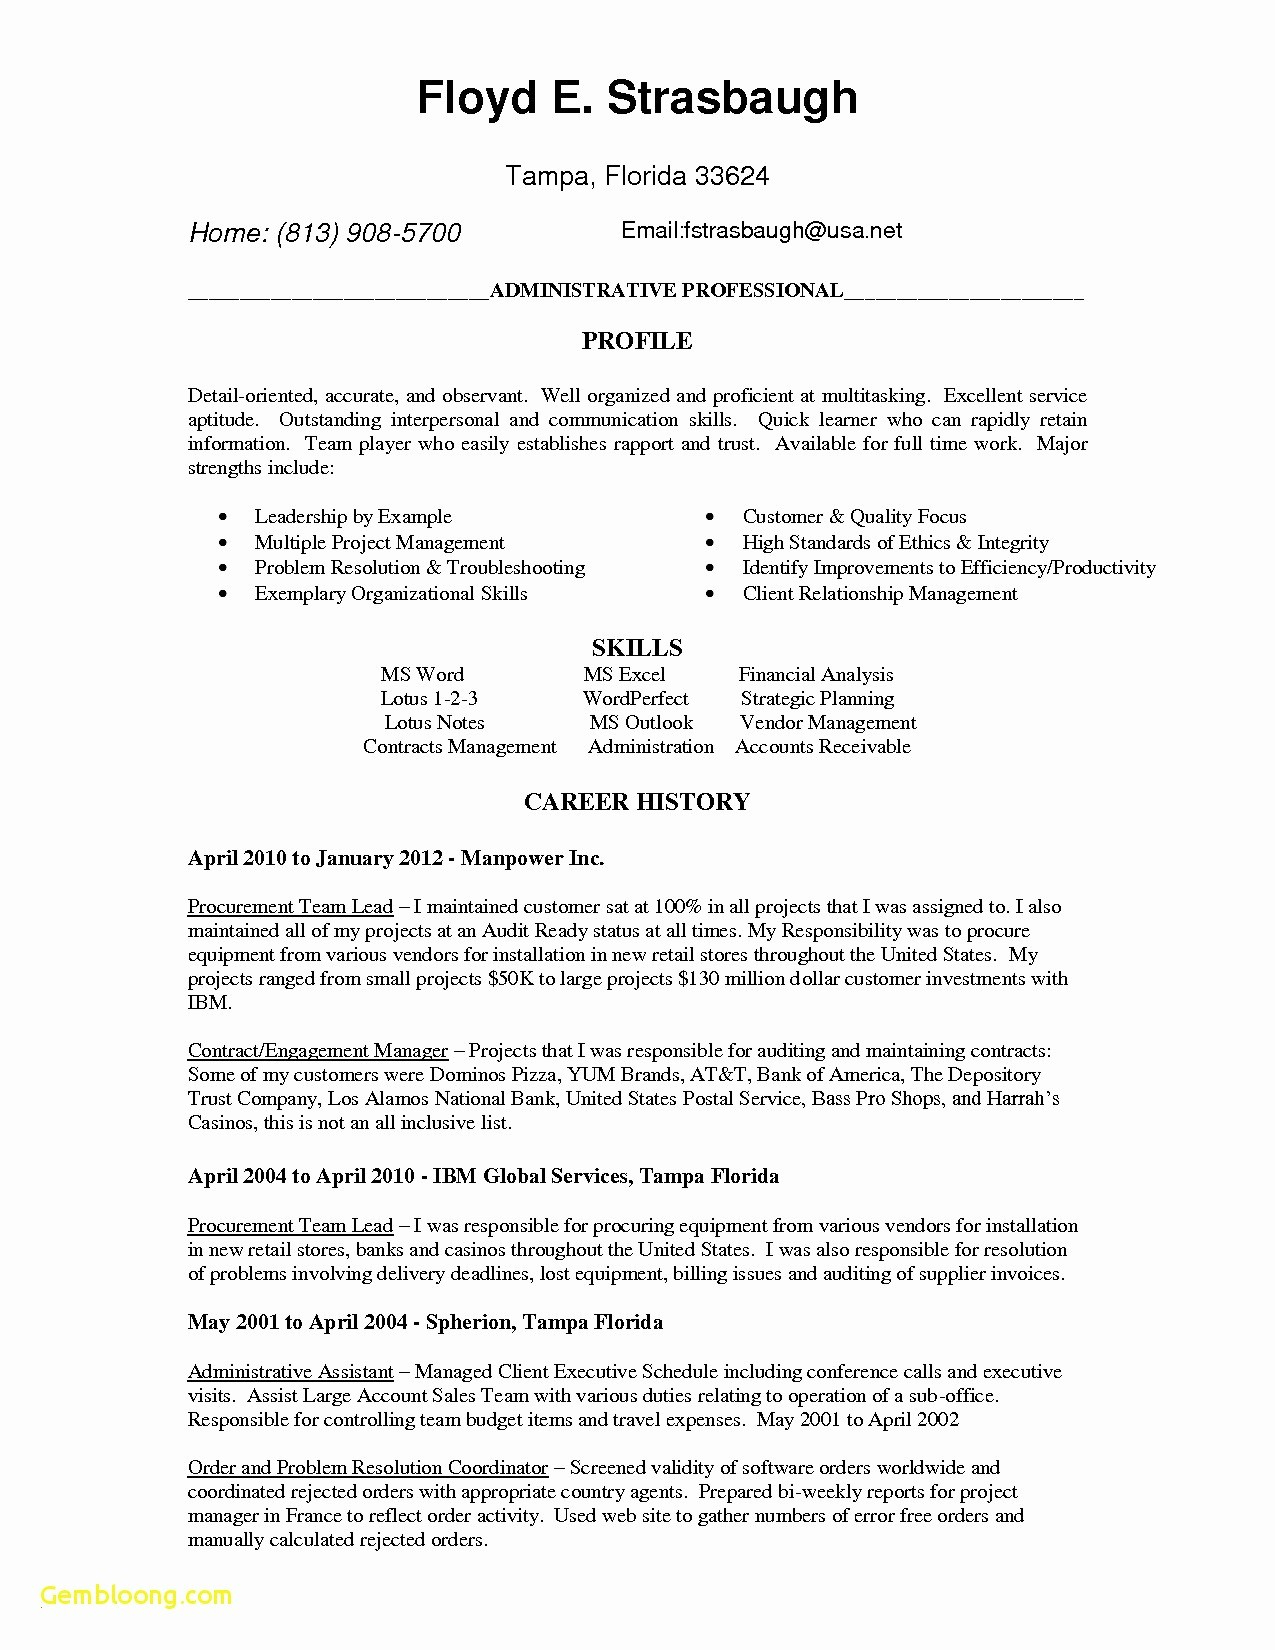 New Hire Welcome Letter Template - Sample Sales Resume Elegant Hr Executive Resume New Sample Resumes